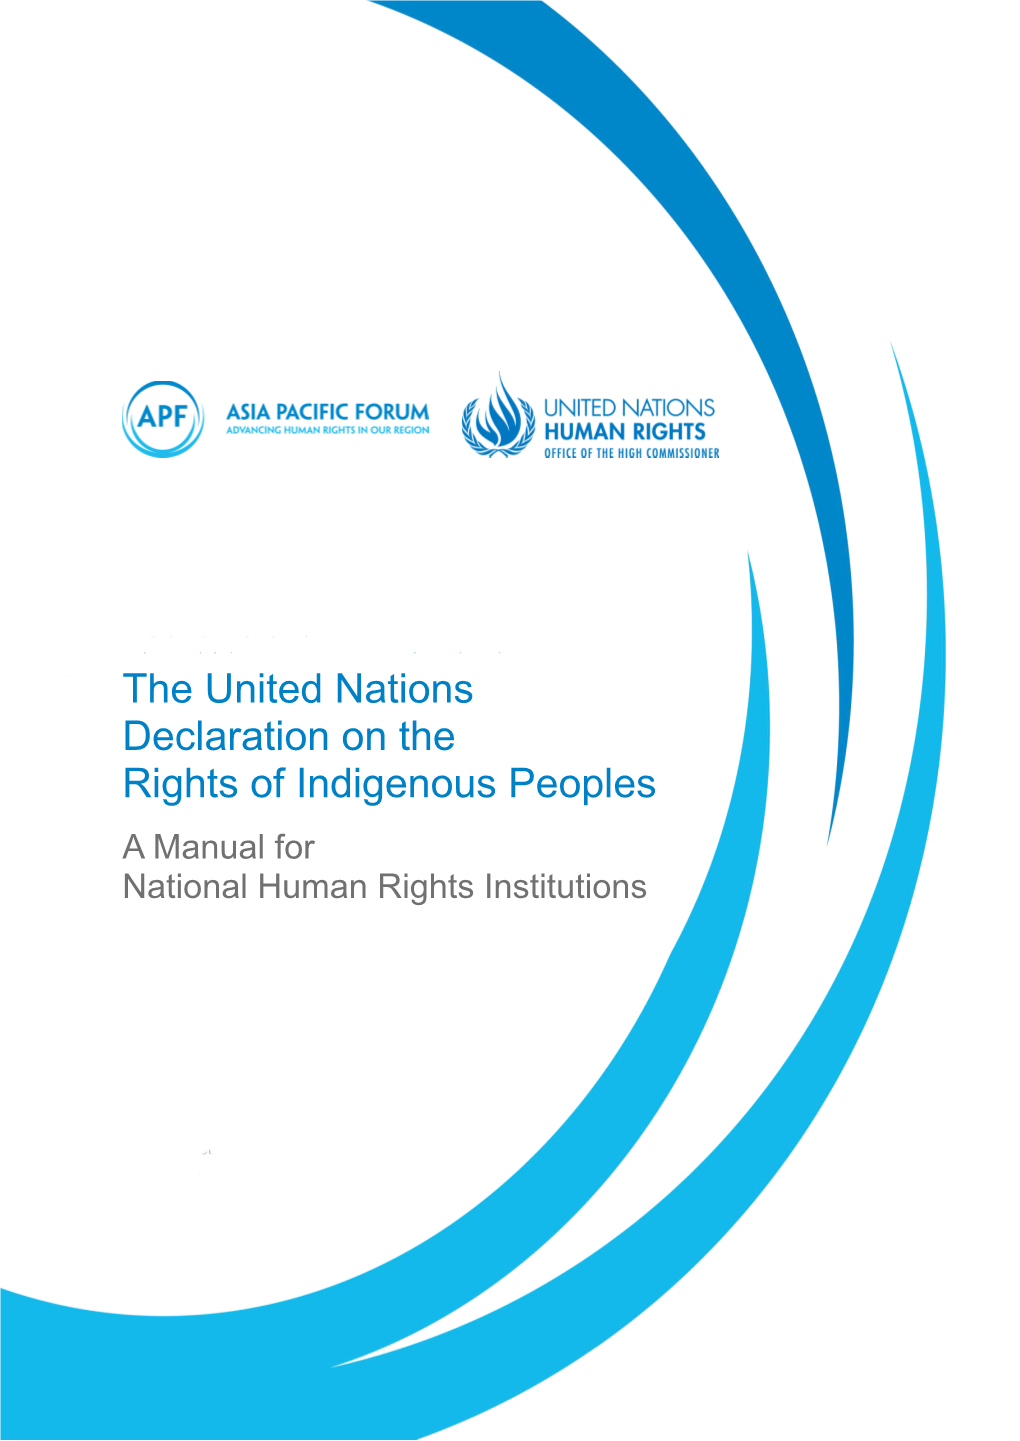 The UNDRIP: a Manual for Nhris